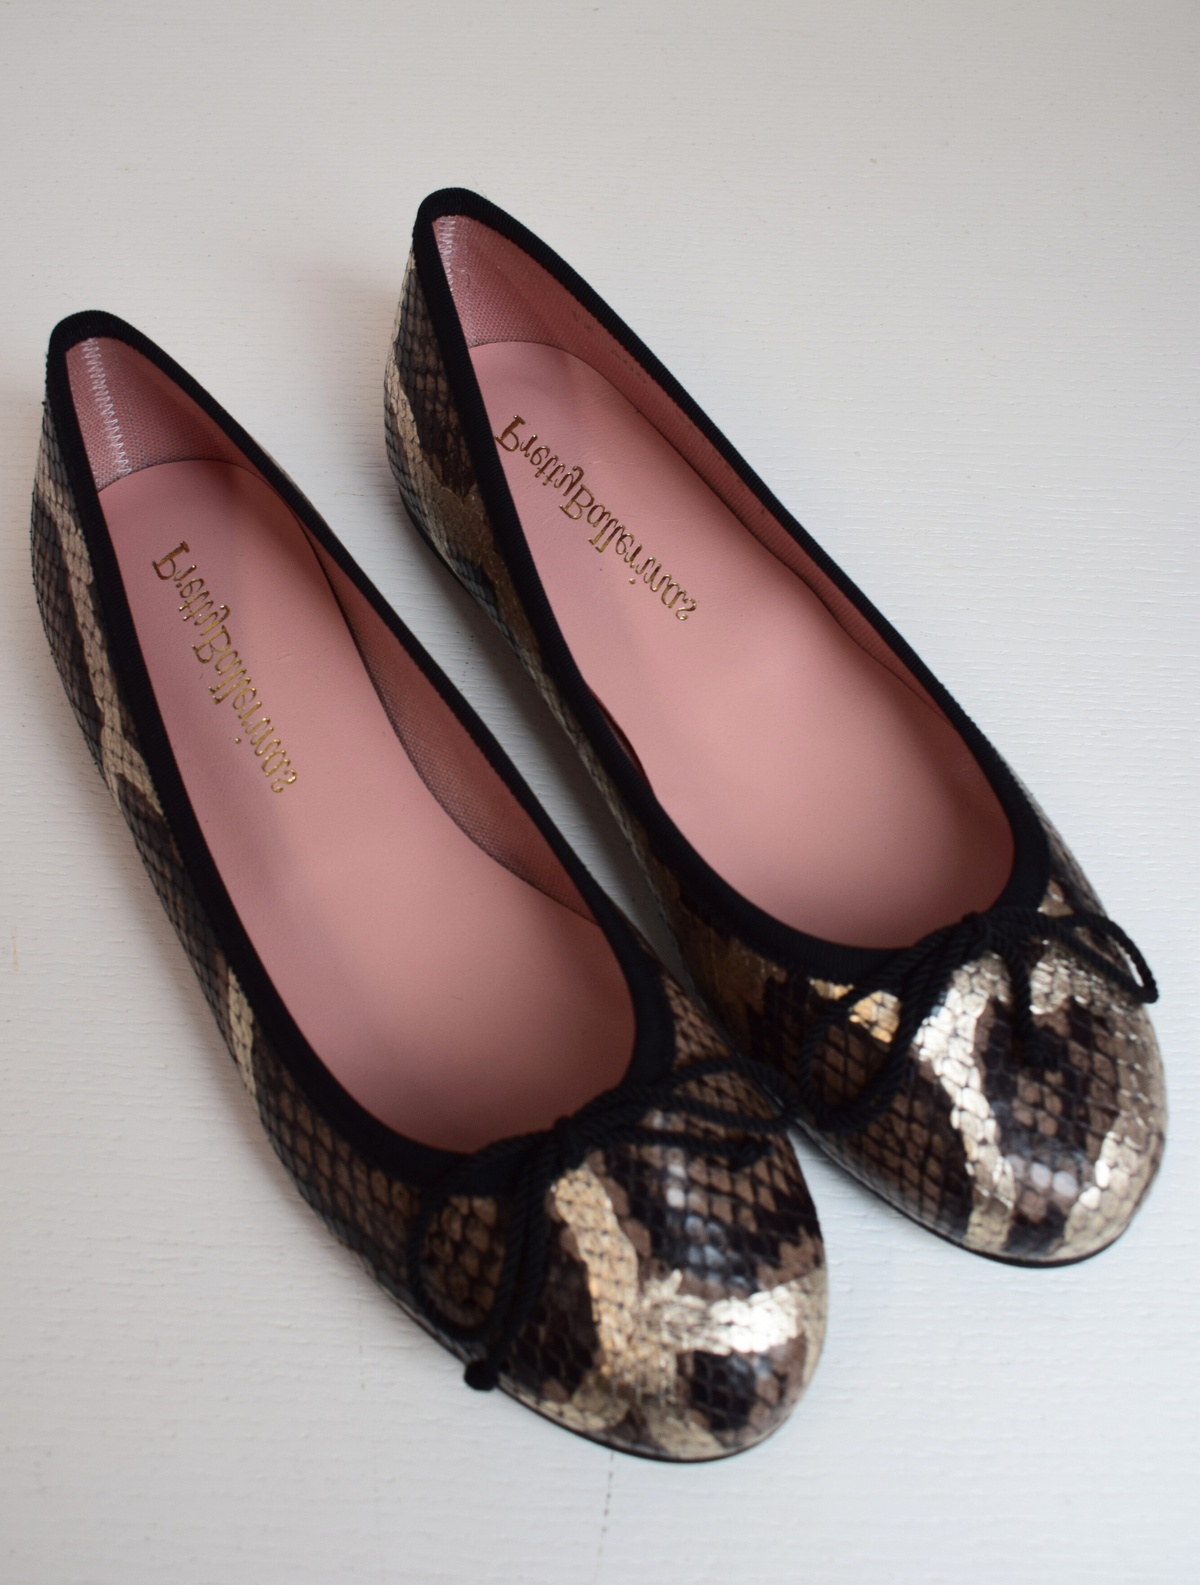 Mock snake leather ballet pumps with black bow on toe with gold shimmer detail